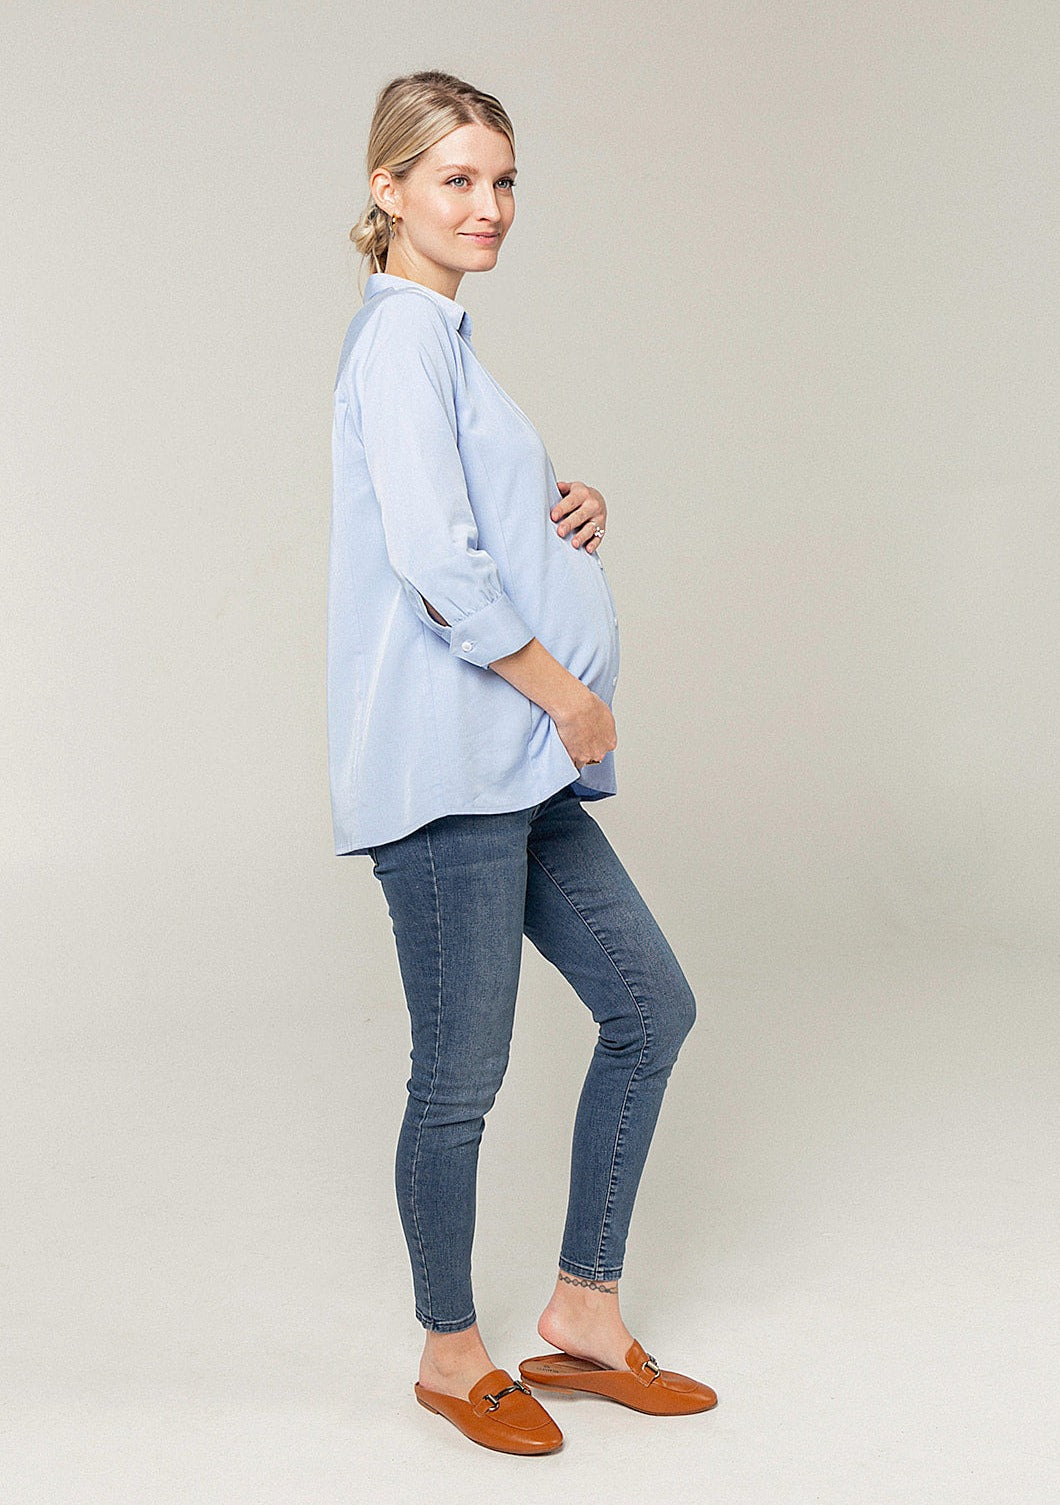 Petite maternity button down shirt. Maternity blouses. Nursing tops for breastfeeding, pale blue.  